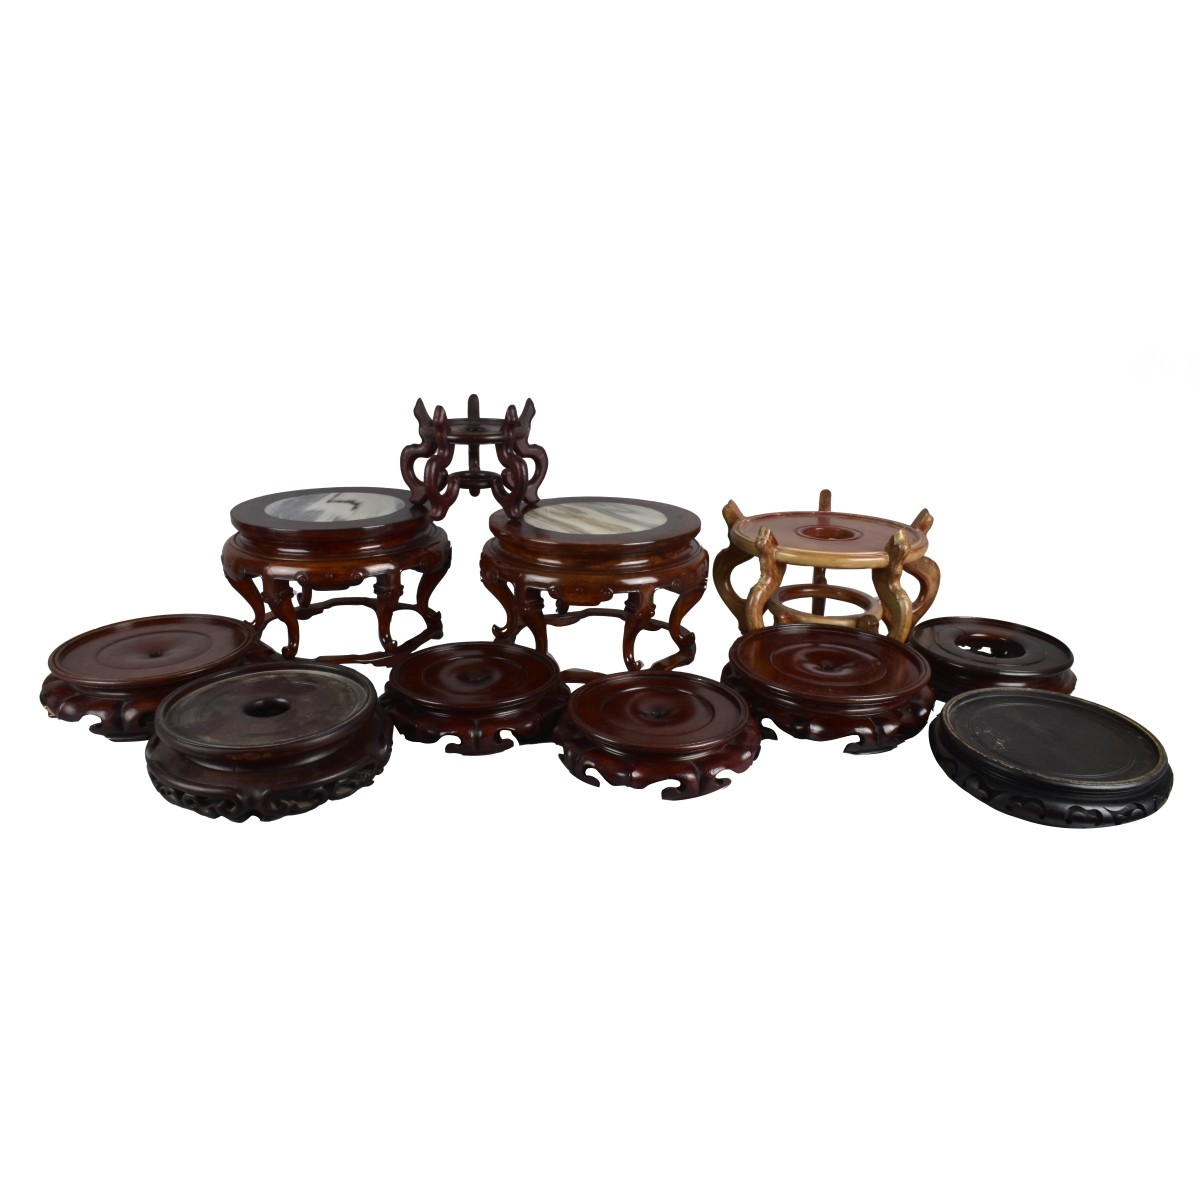 Oriental Wooden Stands Large